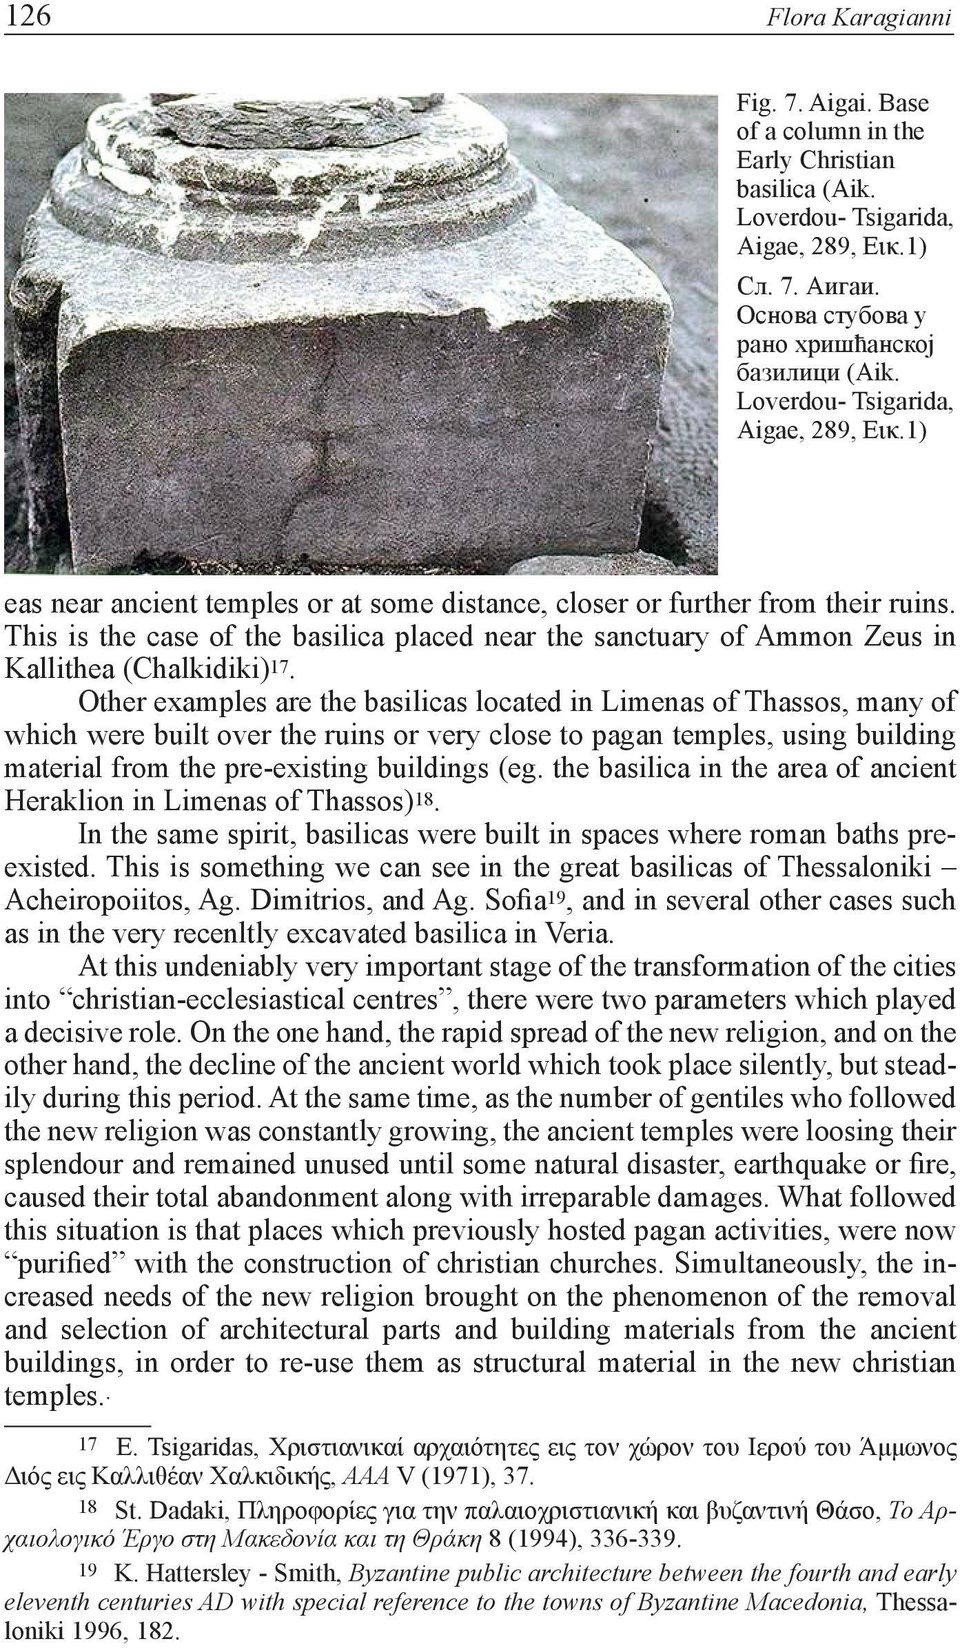 This is the case of the basilica placed near the sanctuary of Ammon Zeus in Kallithea (Chalkidiki) 17.